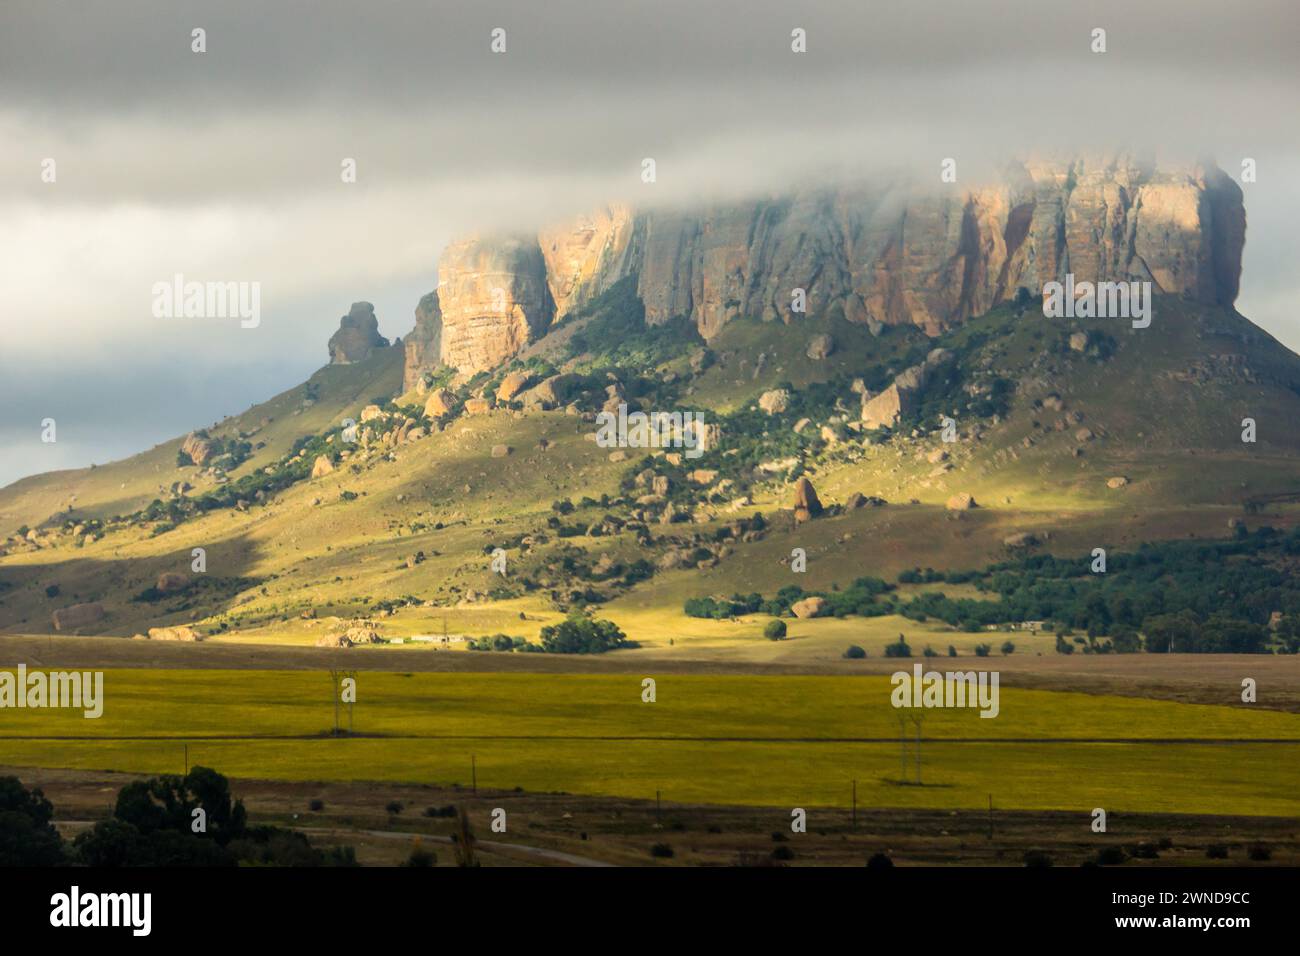 A solitude mountain outside Harrismith in South Africa, with its peak, hidden by low lying clouds and illuminated by the early morning light Stock Photo